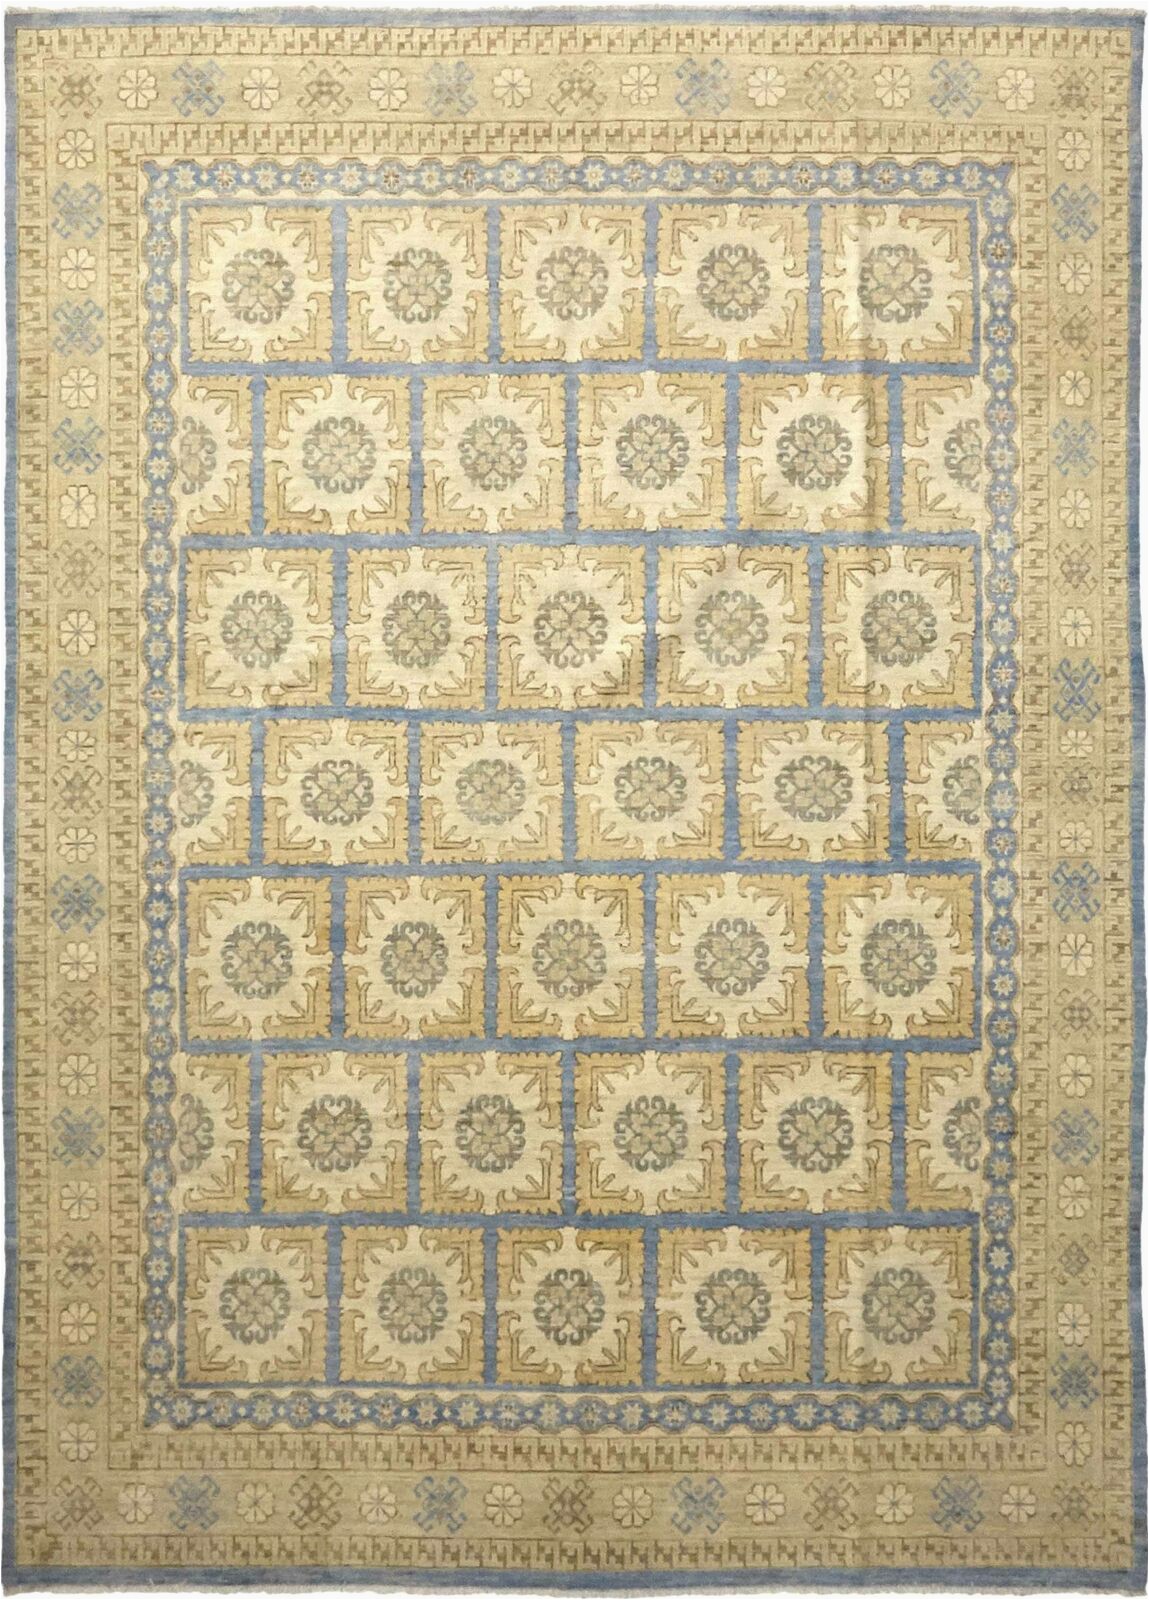 12 Ft X 12 Ft area Rug solo Rugs Khotan Hand Knotted area Rug In Hazelnut Wool 9 X 12 Ft